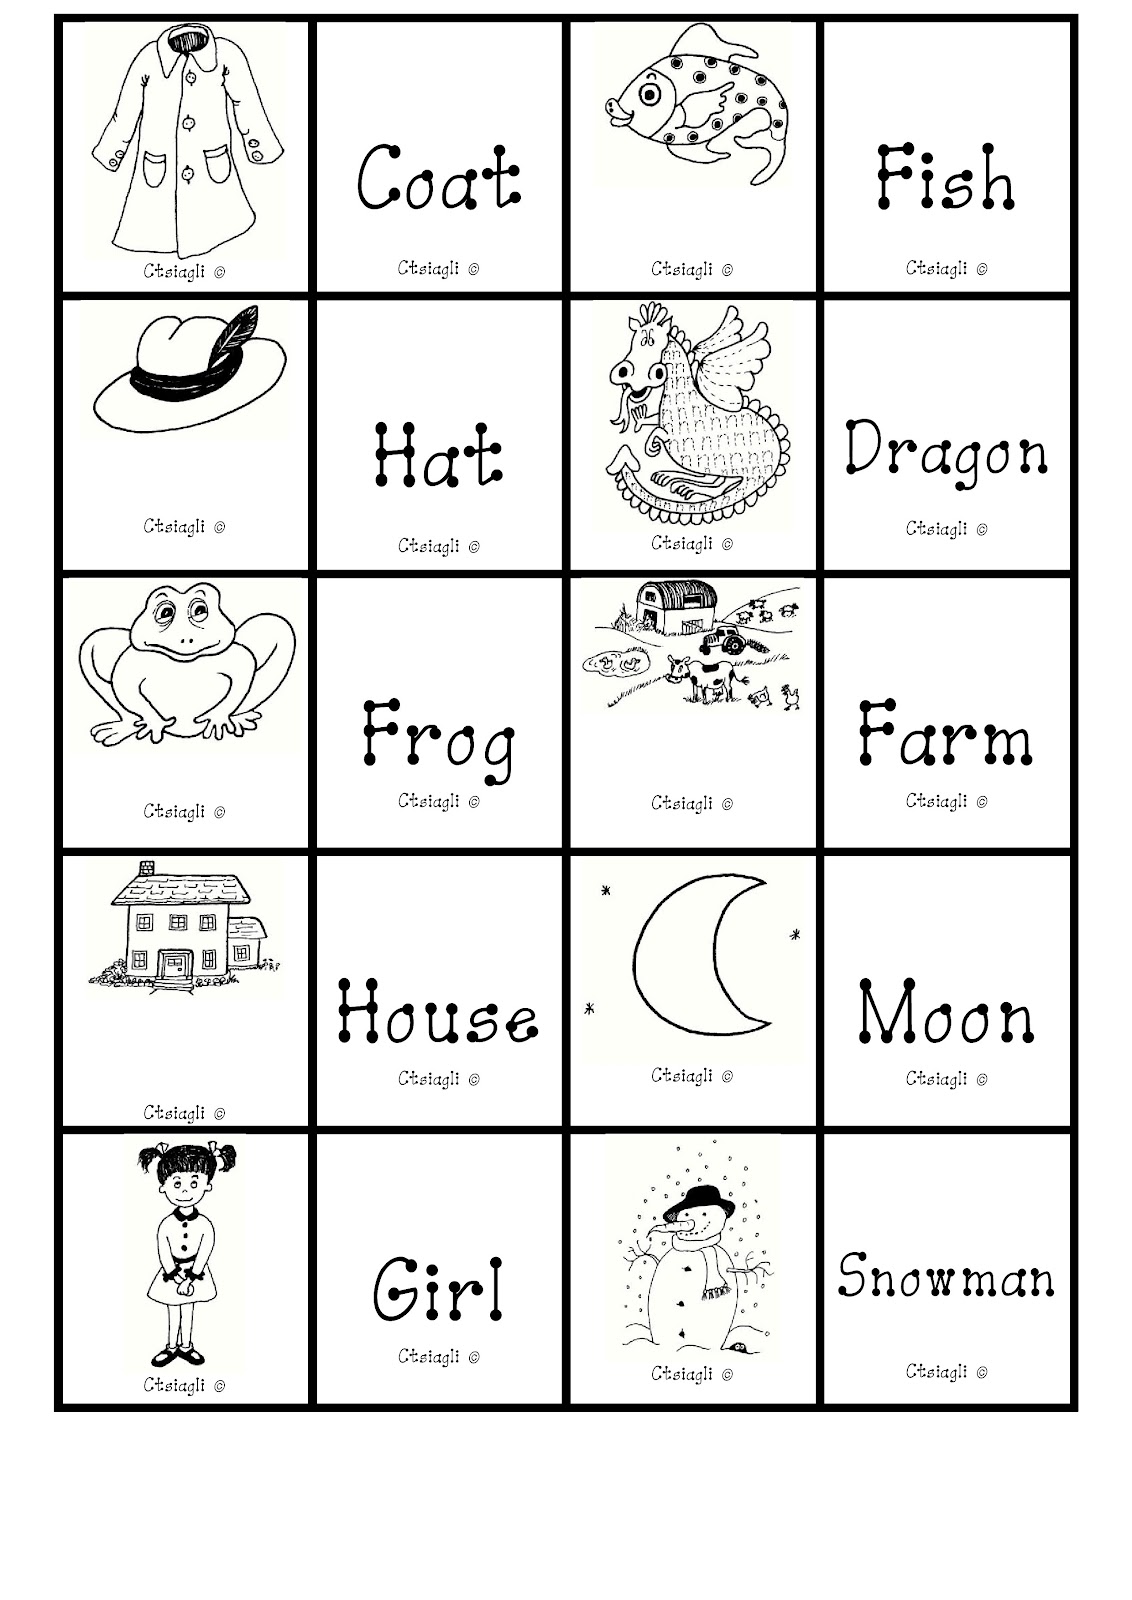 iteacher printable memory game - find a match